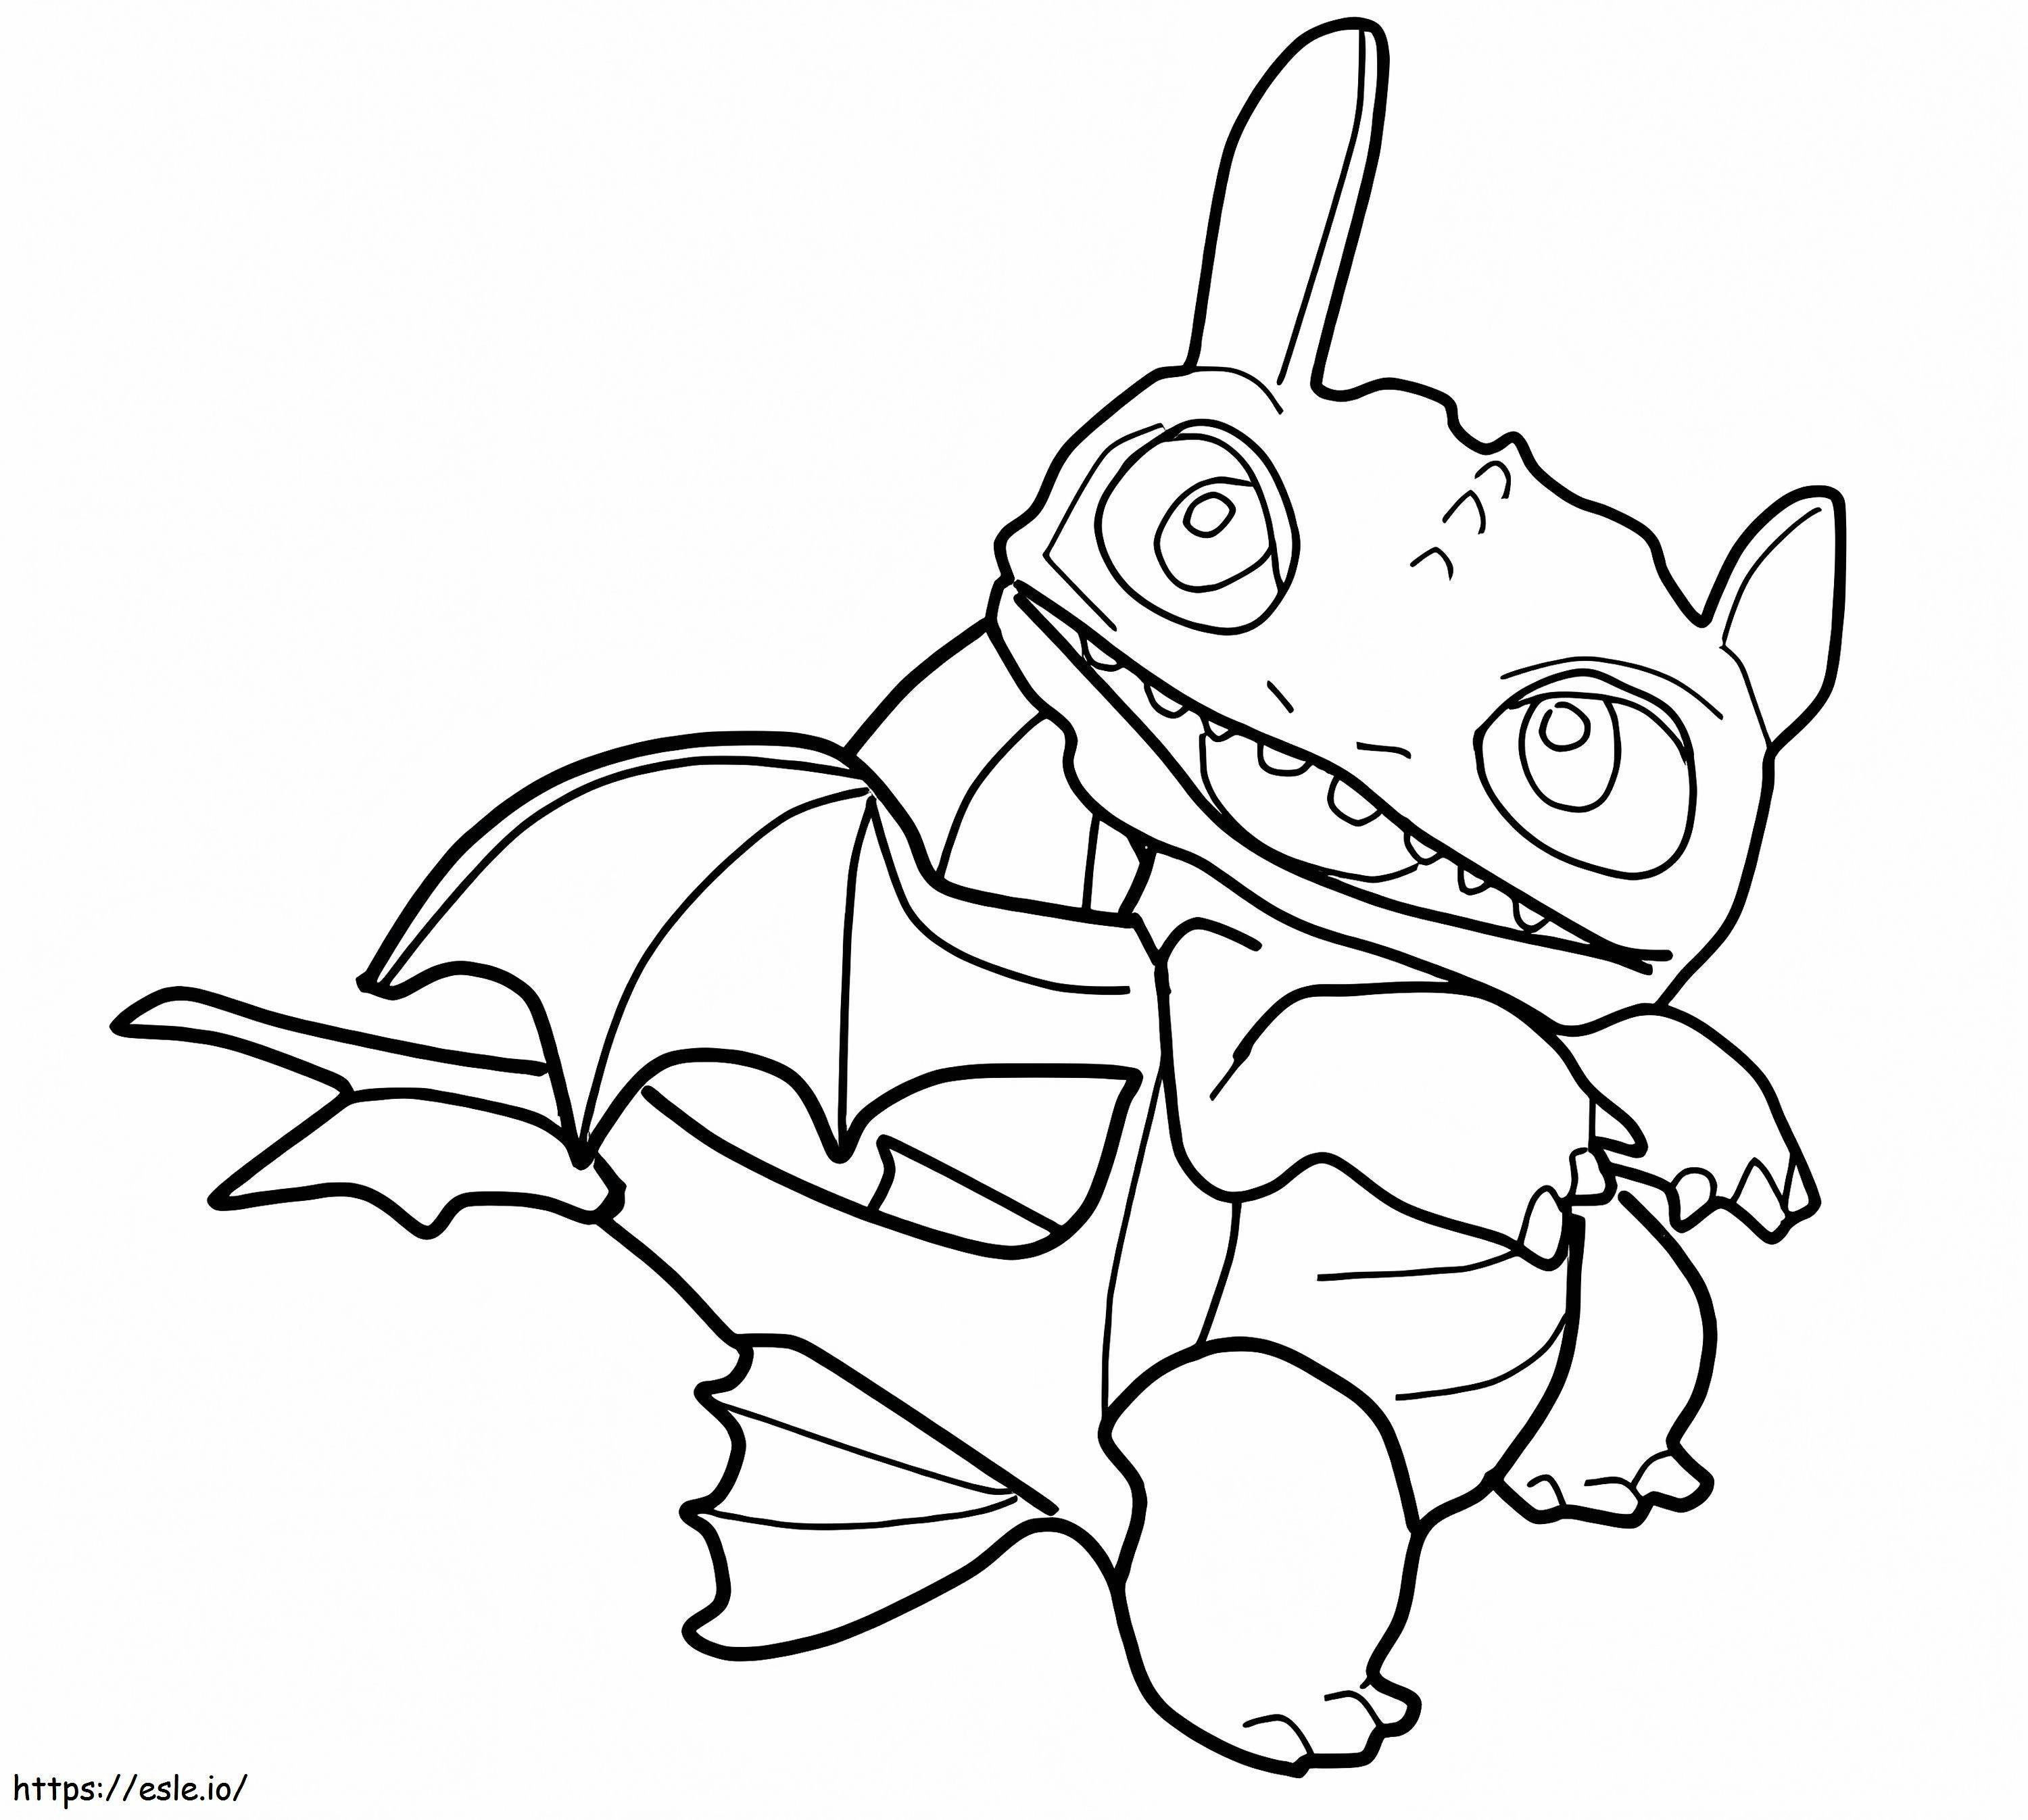 Funny Toothless coloring page